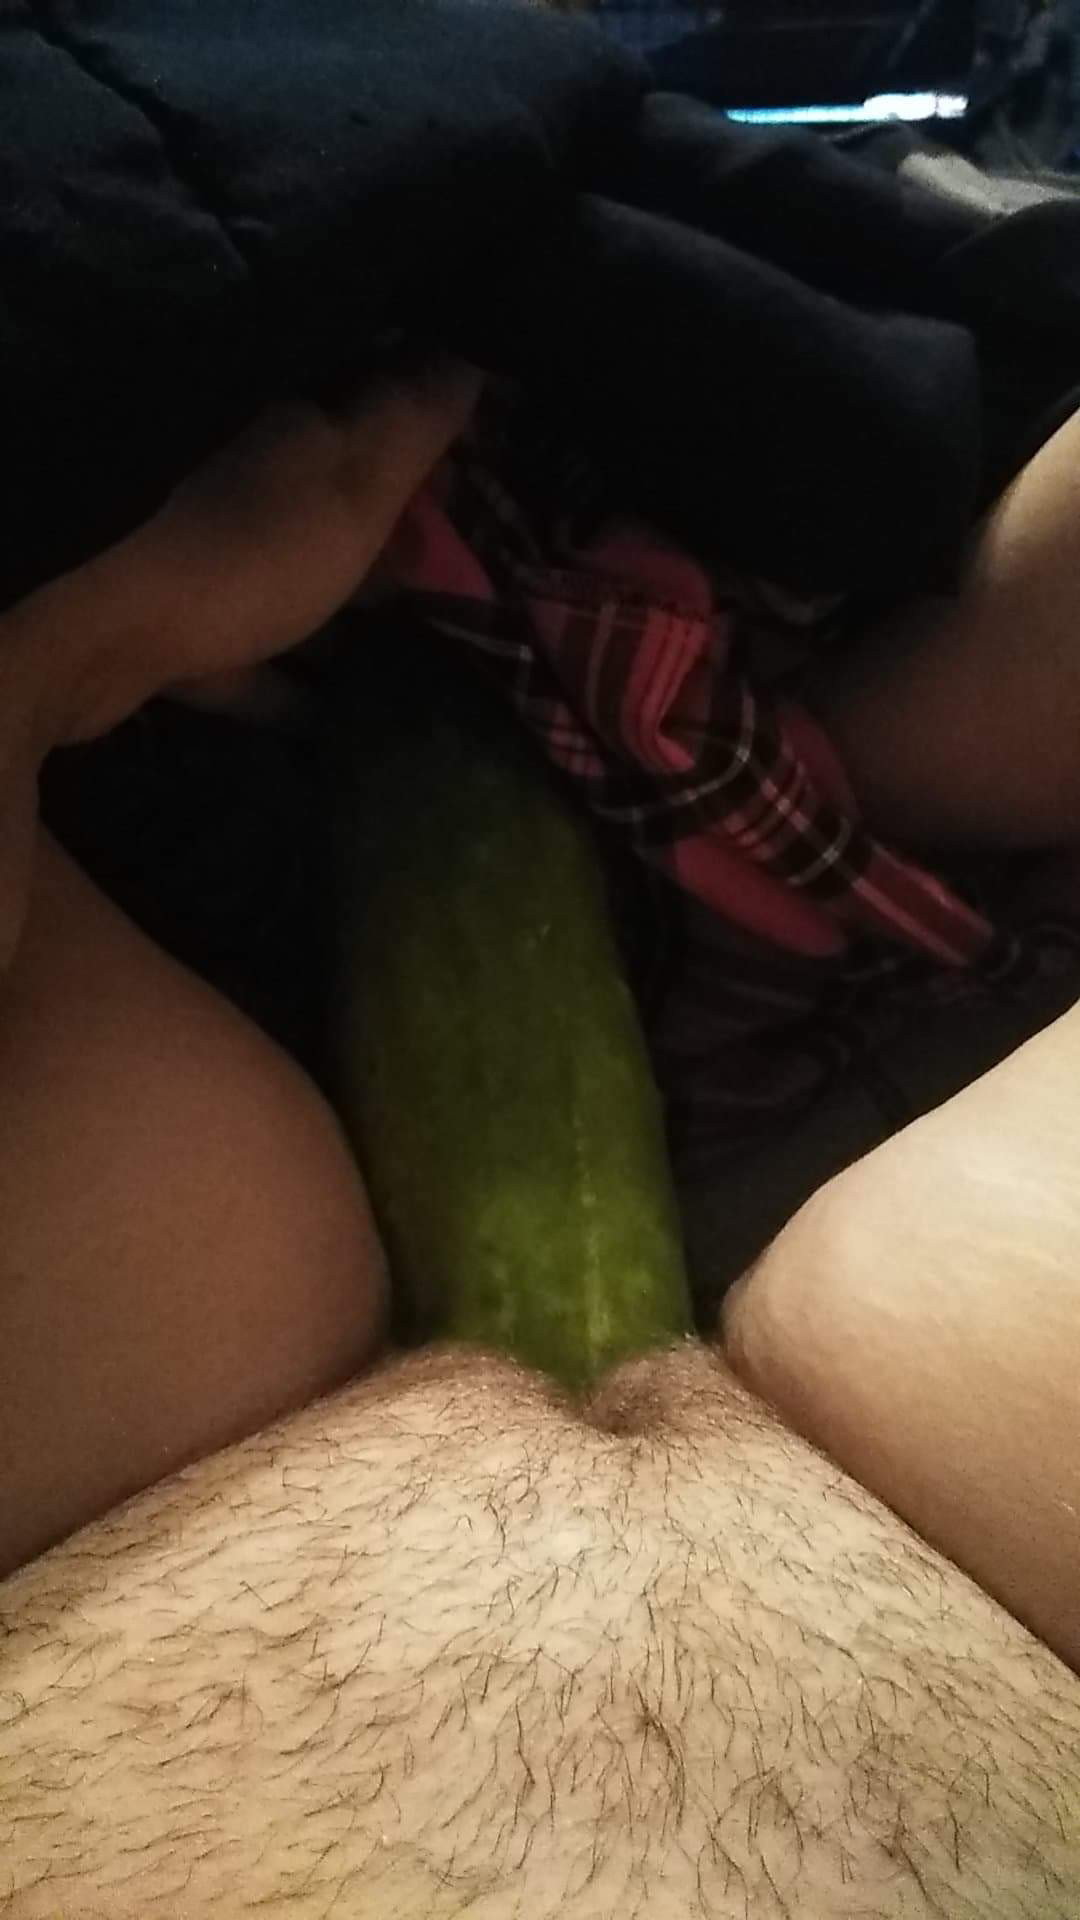 Photo by Slut wife and friend with the username @Tank85,  August 9, 2019 at 9:49 AM. The post is about the topic Pussy and the text says 'wife tried to fit this monster cucumber in her pussy'